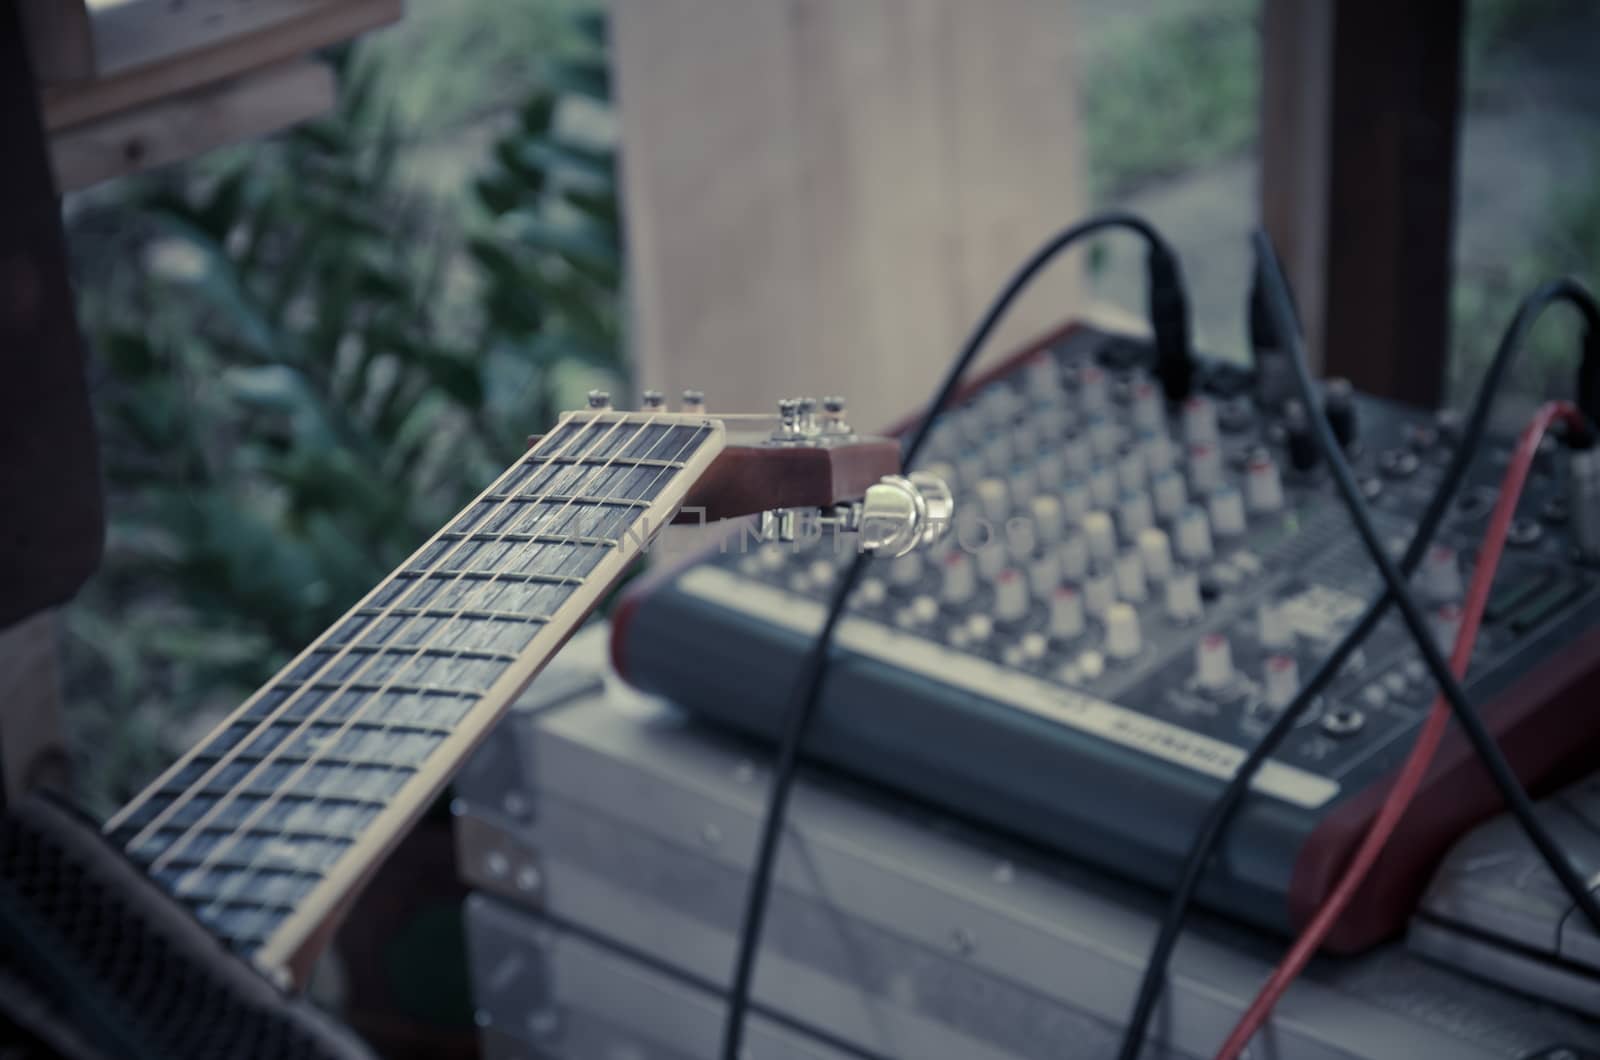 Close up of Fretboard of guitar mixer control by worrayuth